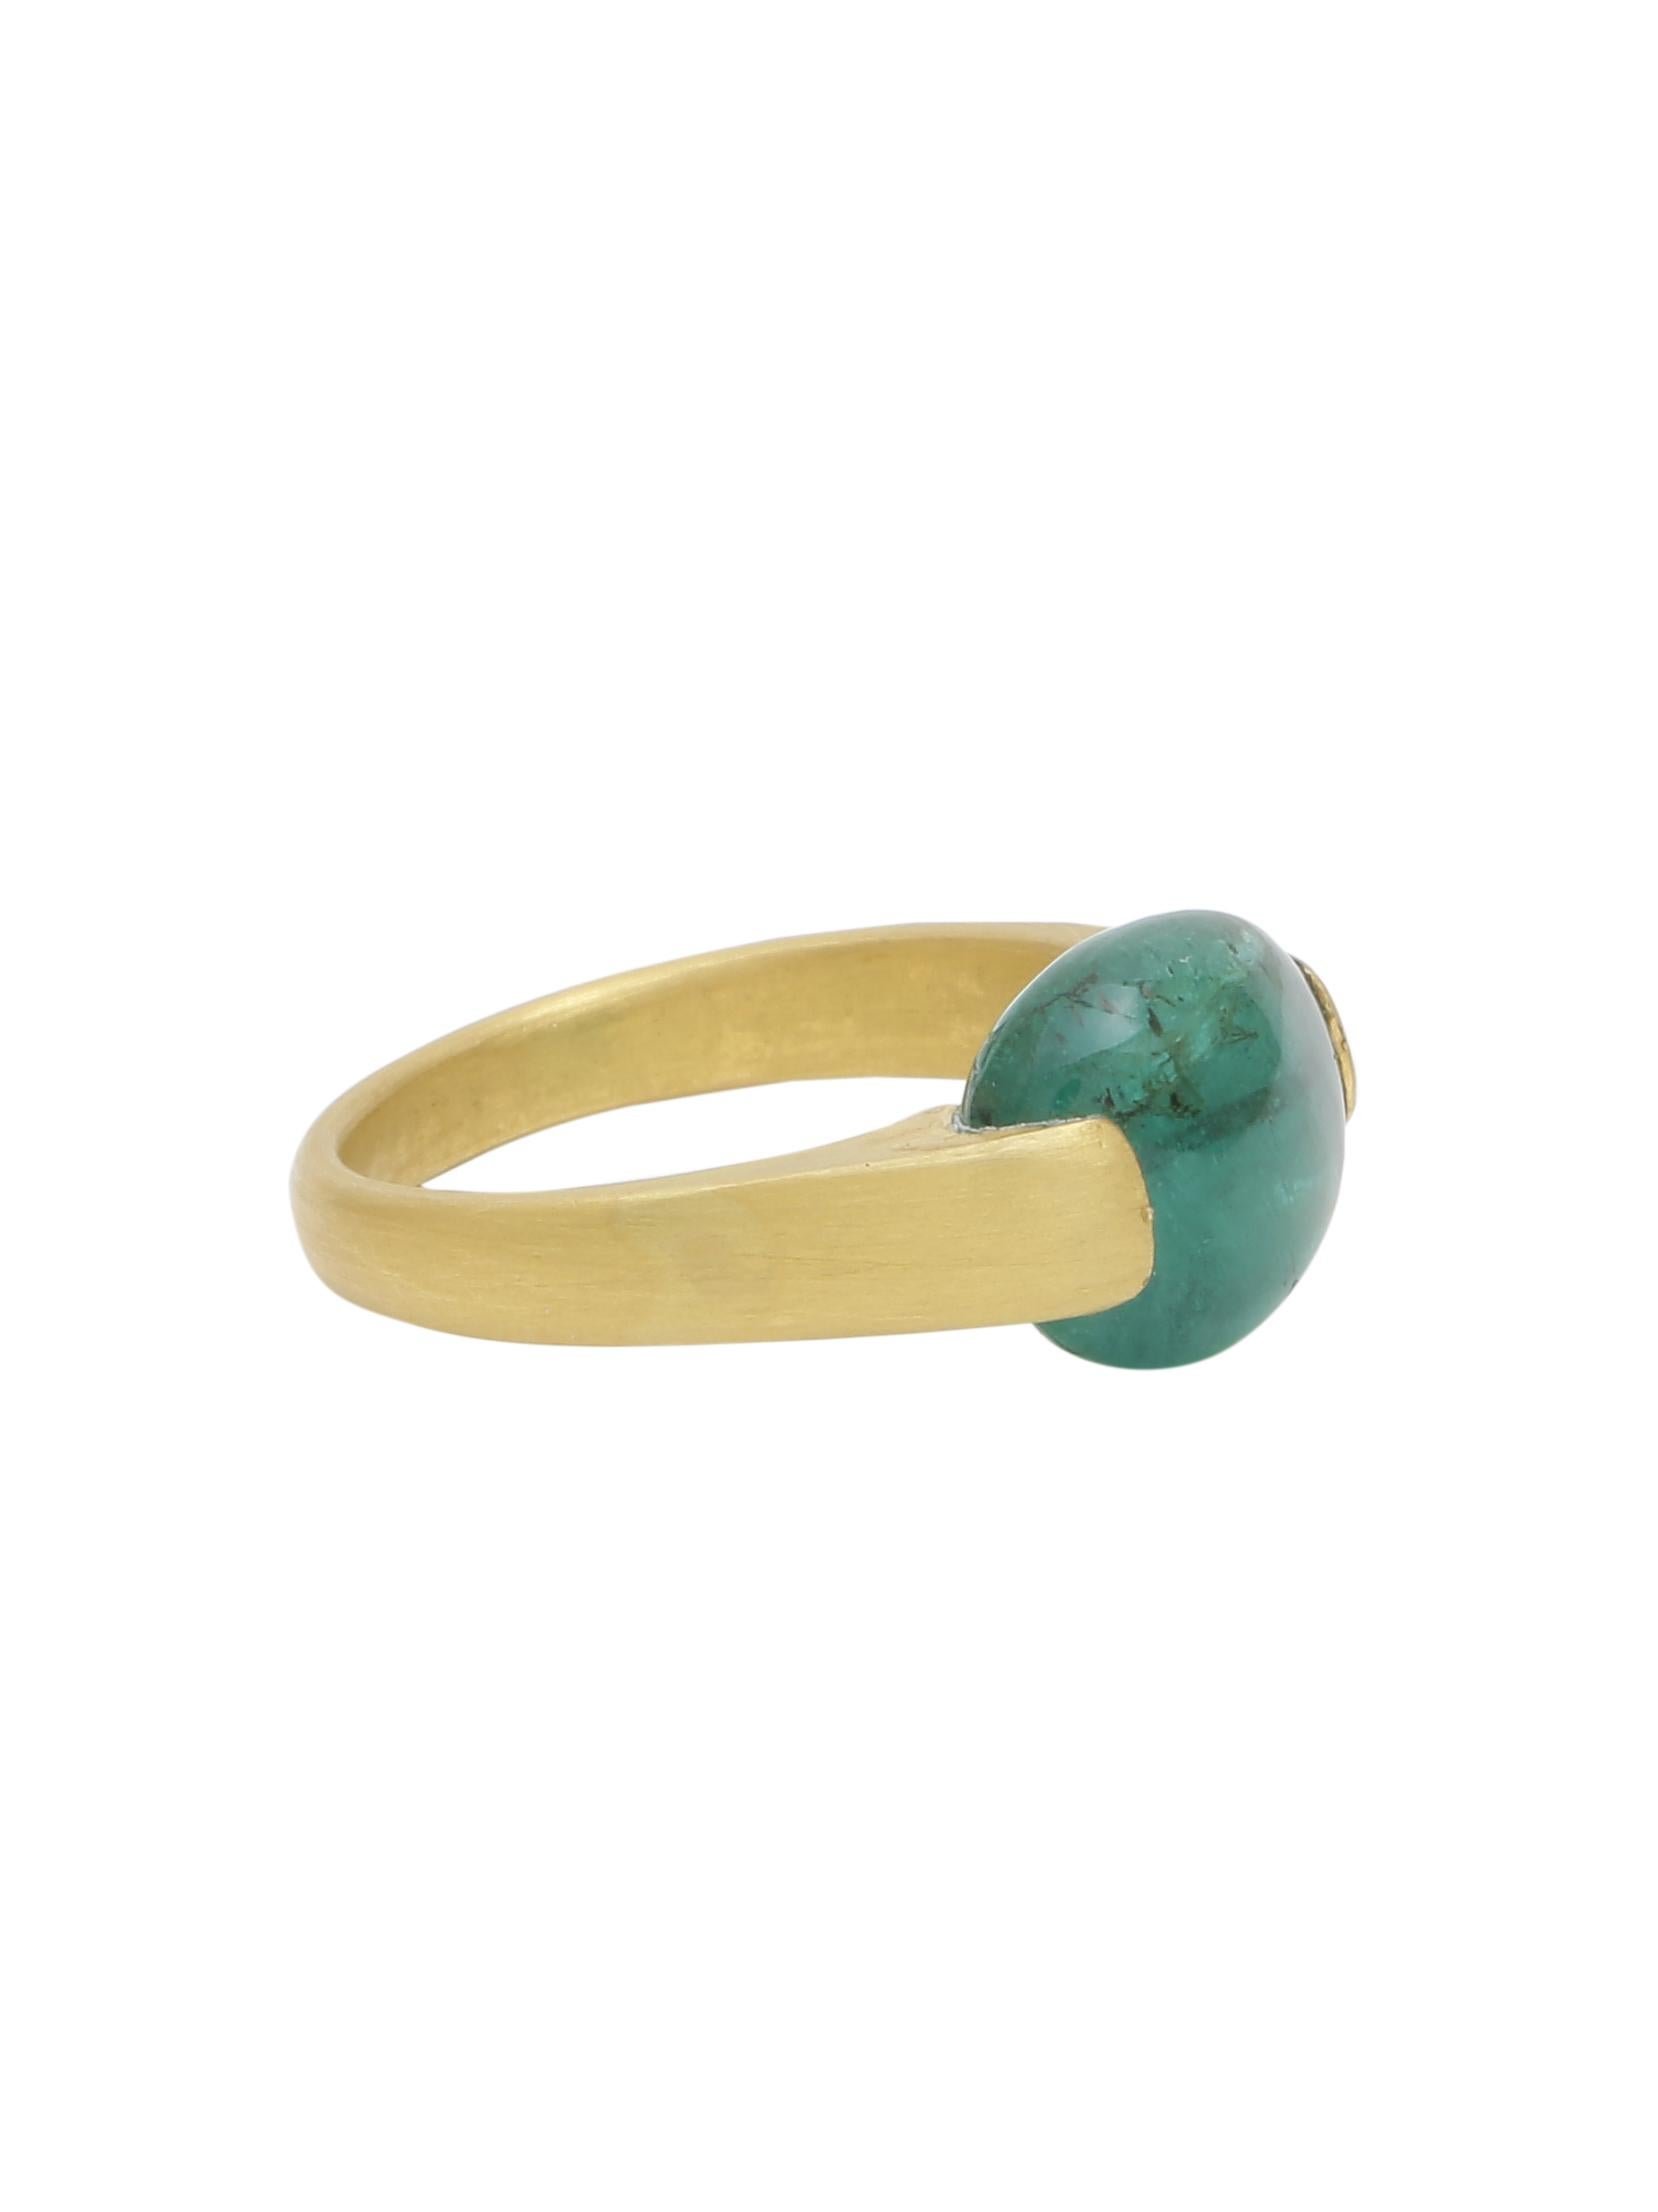 A beautiful and unique Emerald ring. In the ring you will see an Emerald Bead carefully set in the ring with Gold wire. The unique ring is handmade in 18K Yellow Gold in matte finish. The Zambian Emerald in the ring weighs 5.96 carats. And the total